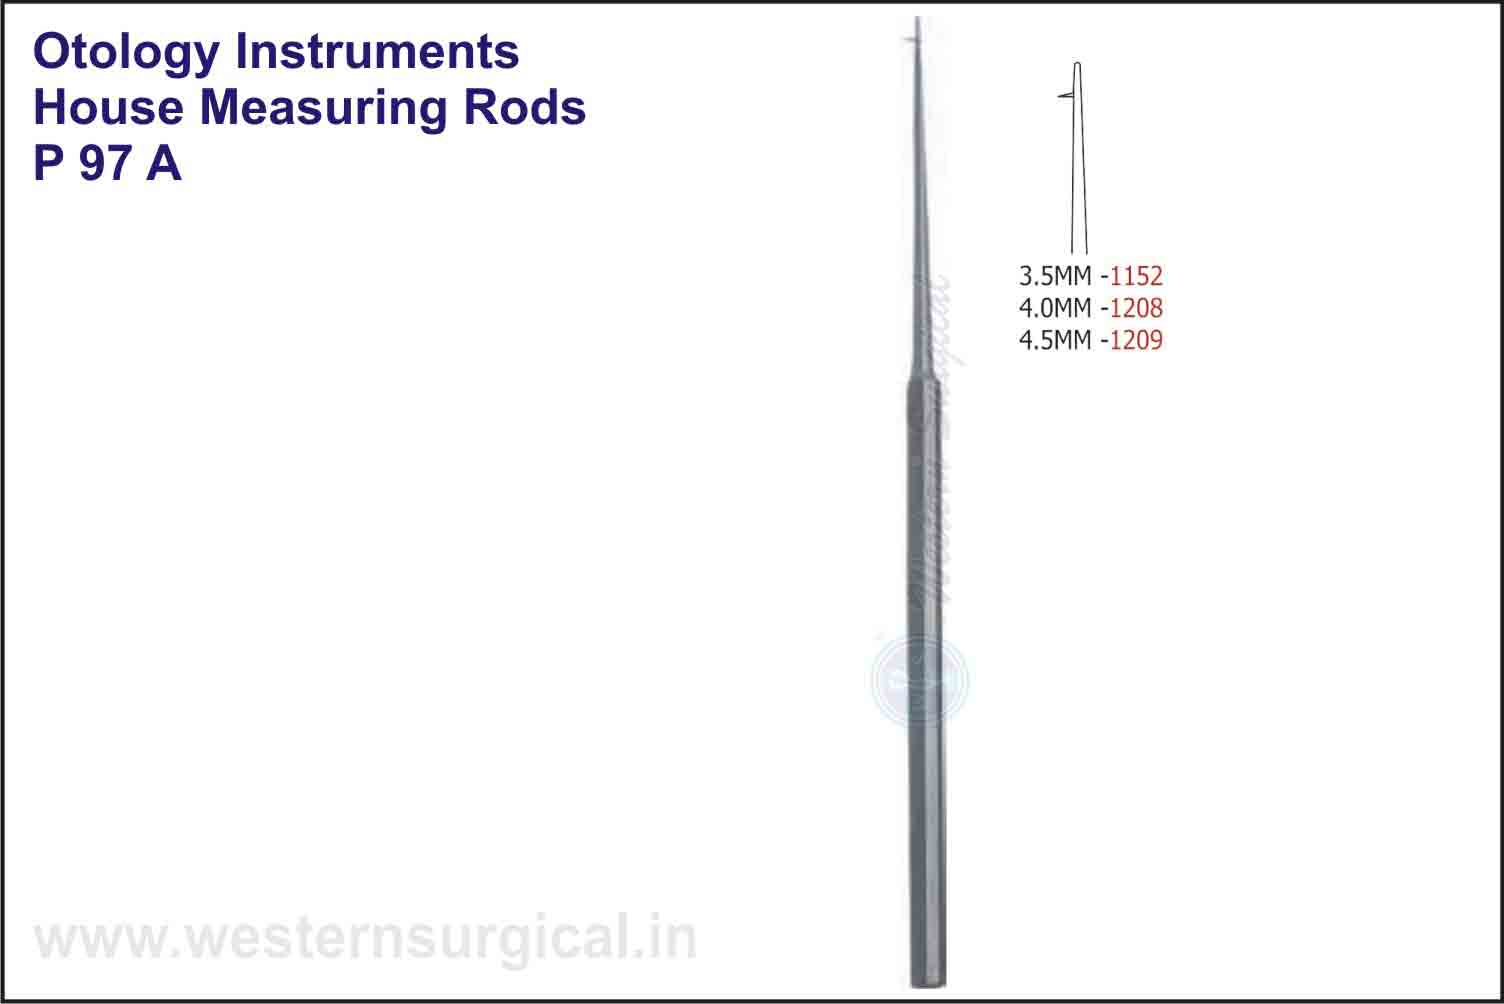 HOUSE MEASURING RODS